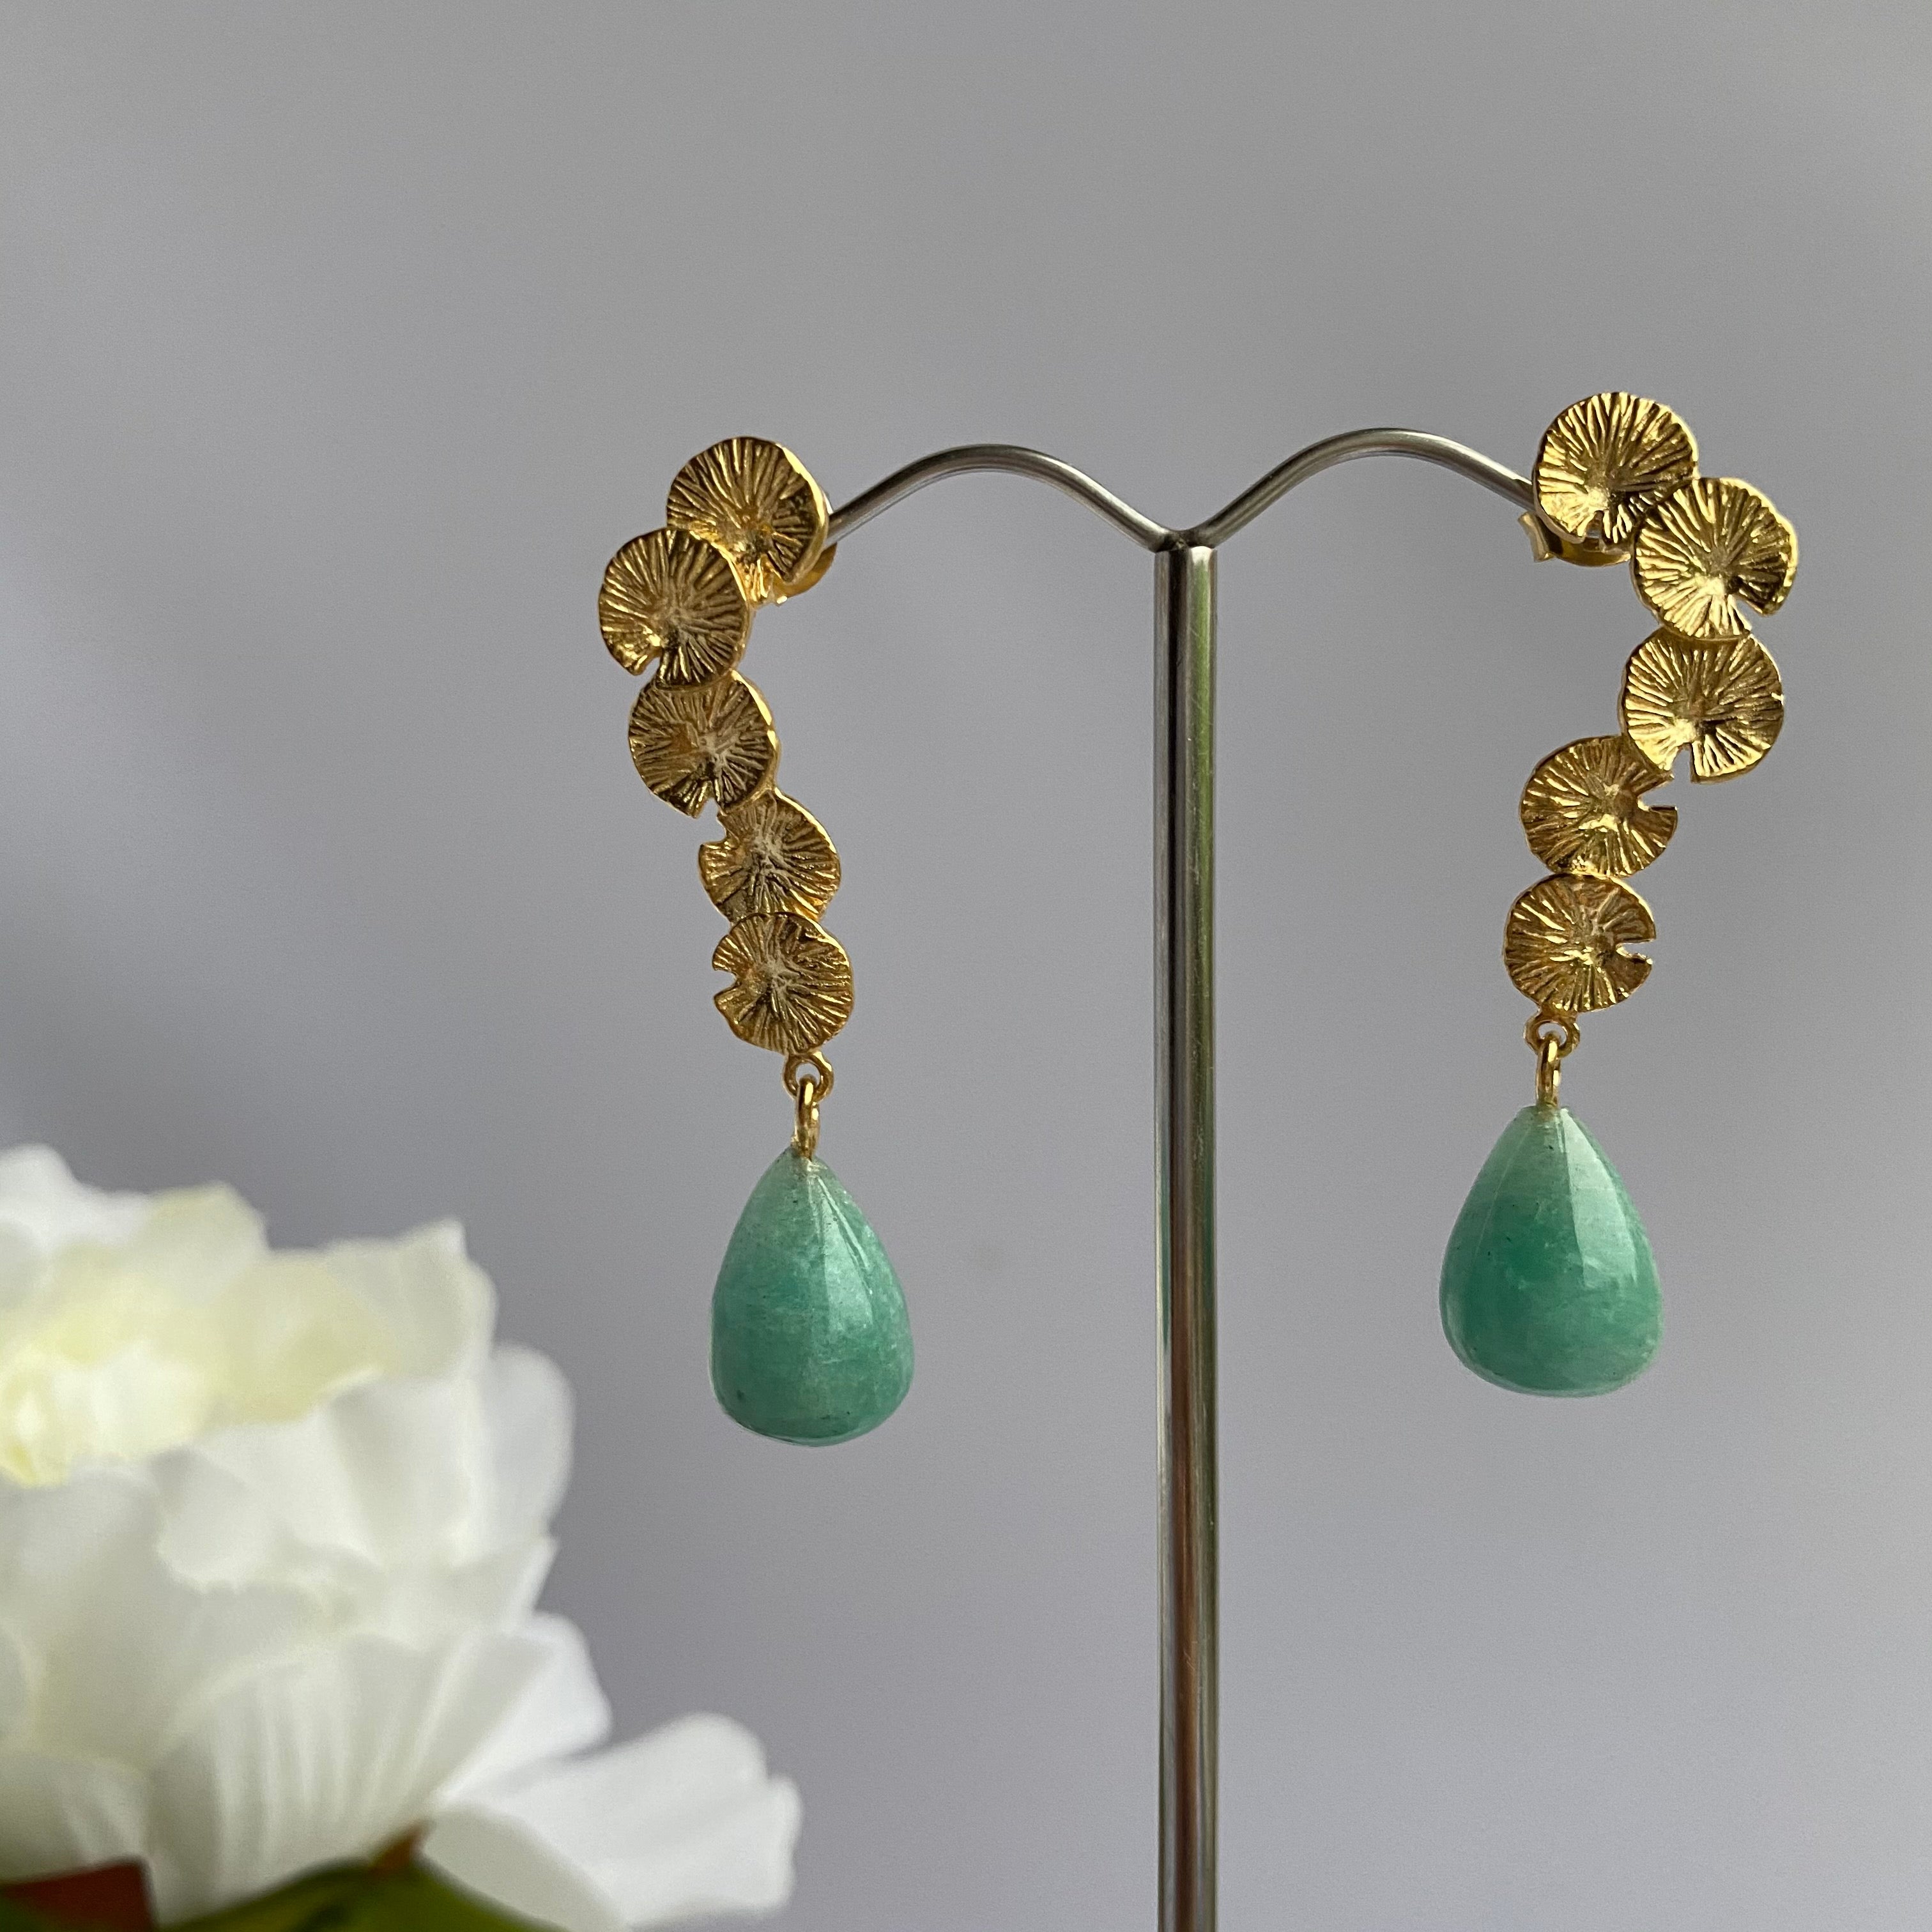 Lily Pad Earrings in Gold Plated Sterling Silver with a Amazonite Stone Drop